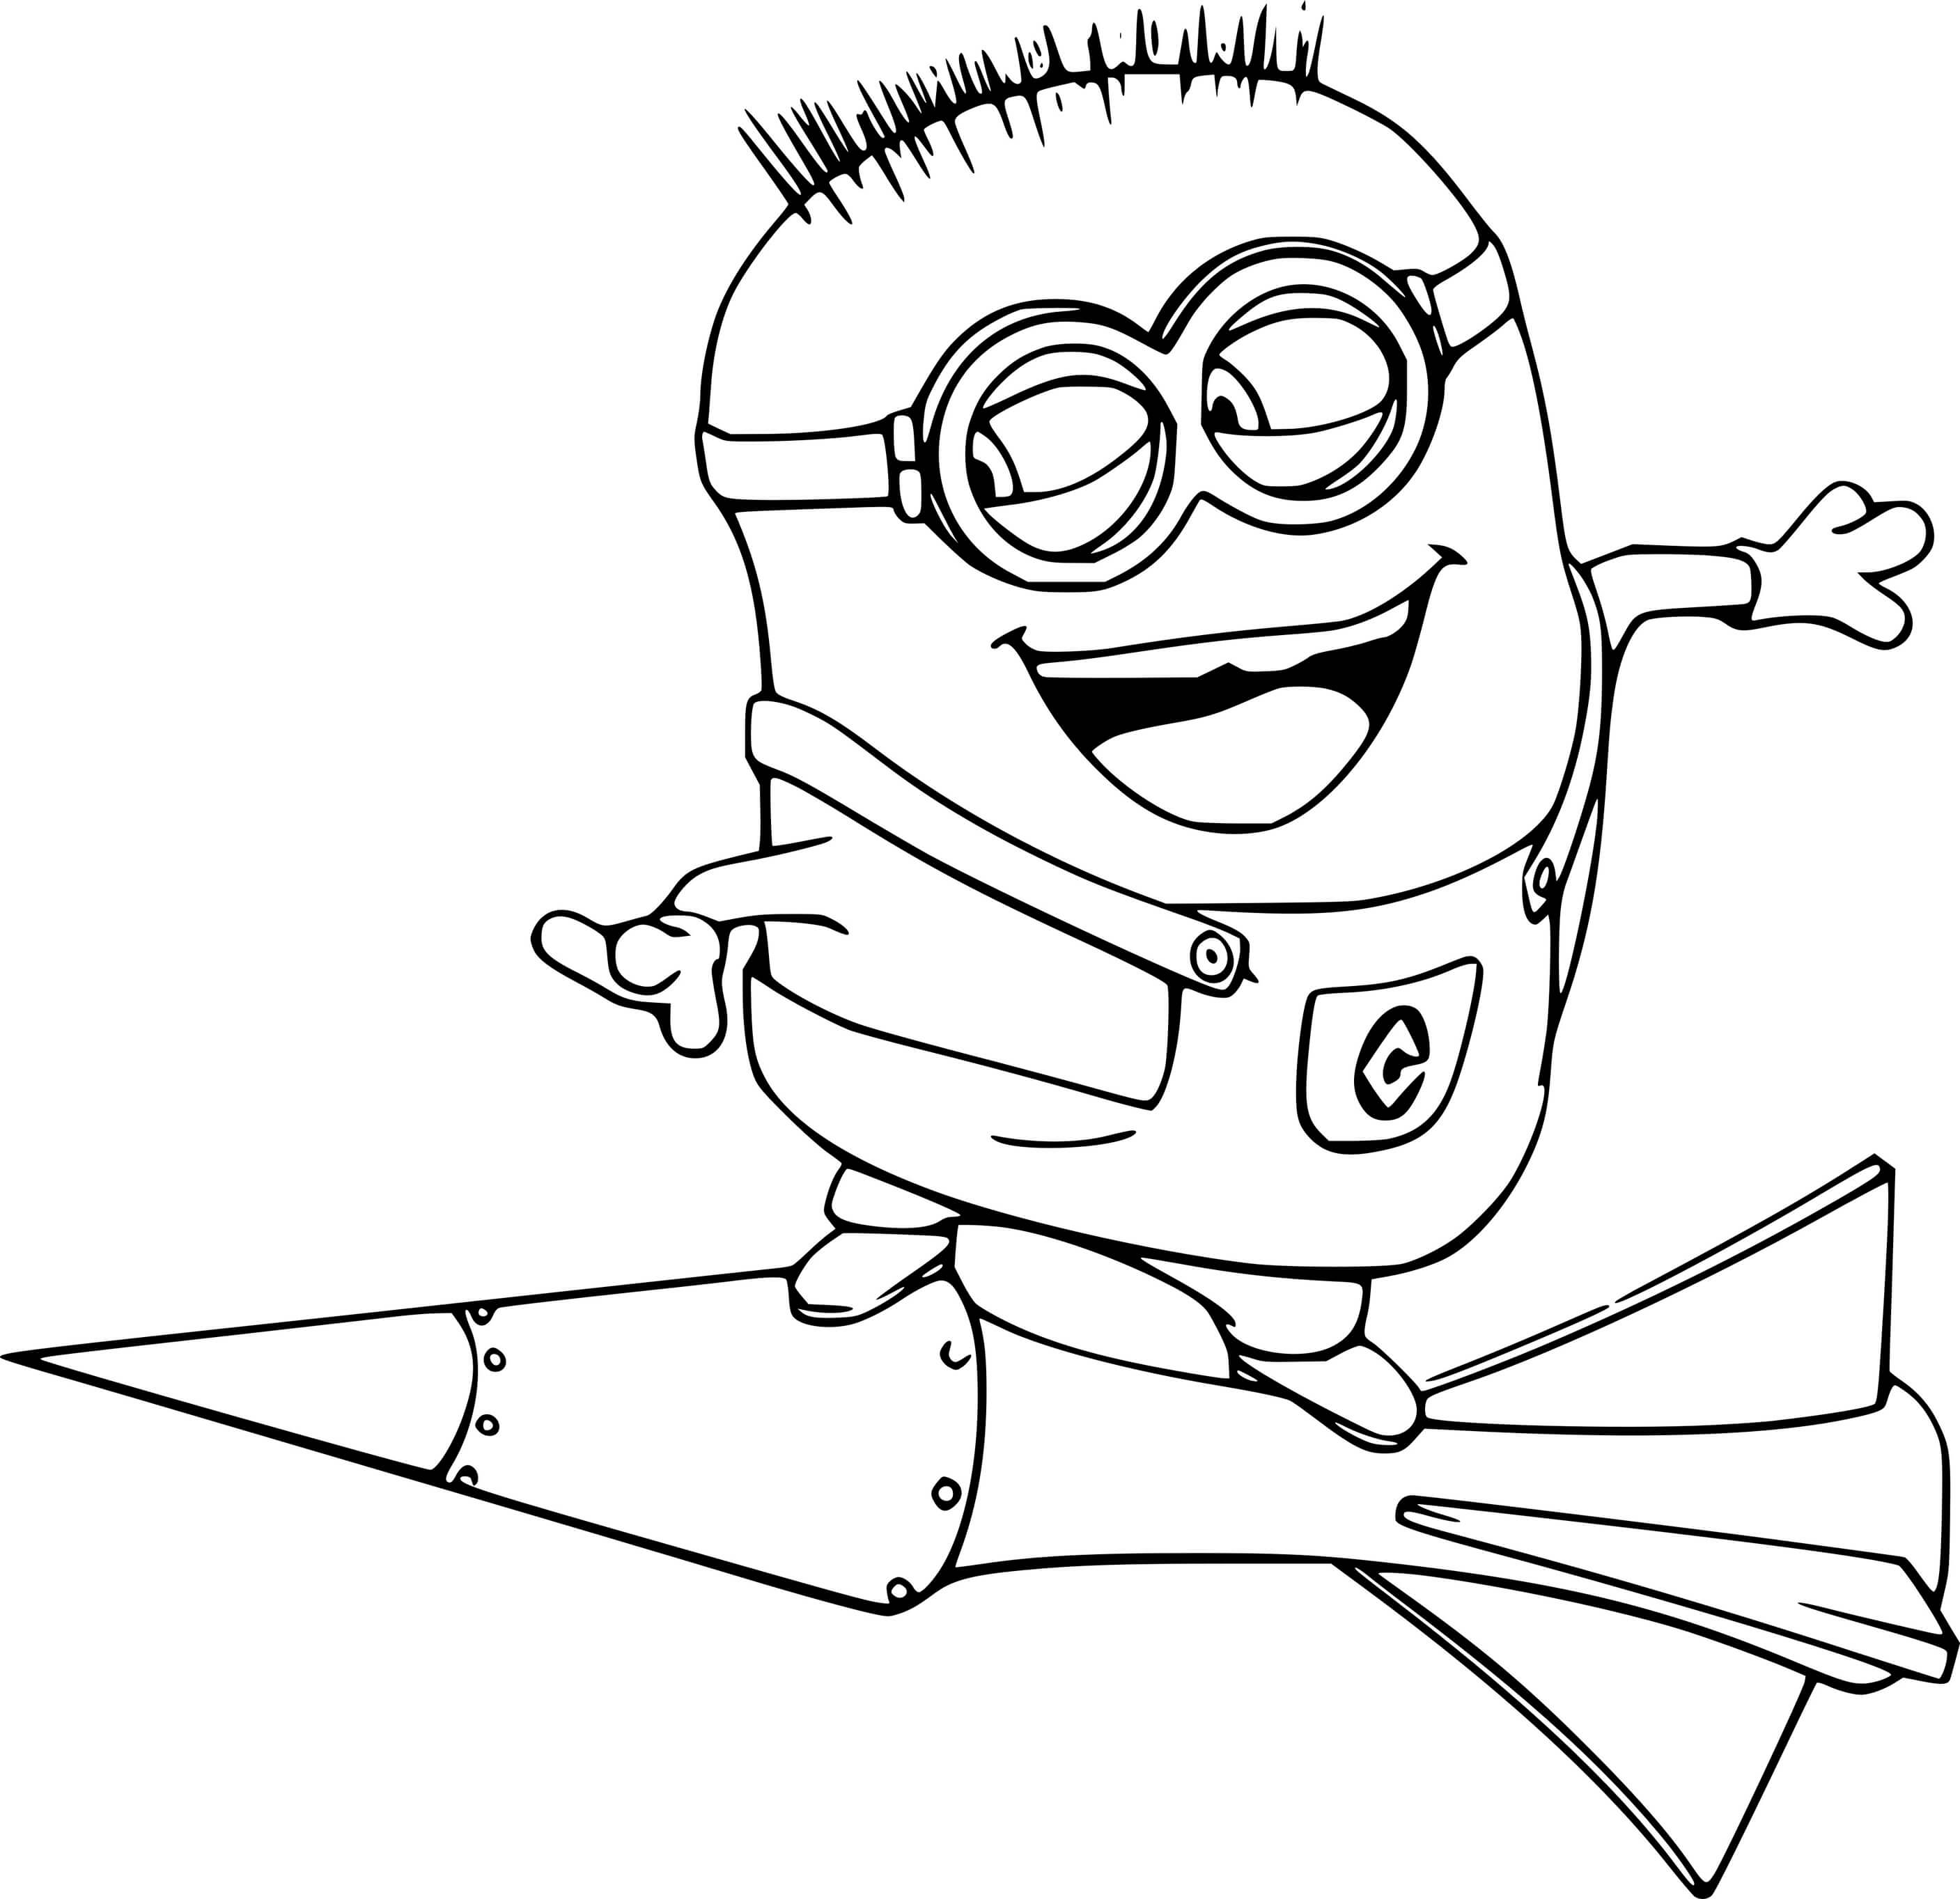 Jorge Minion On The Rocket Coloring Page